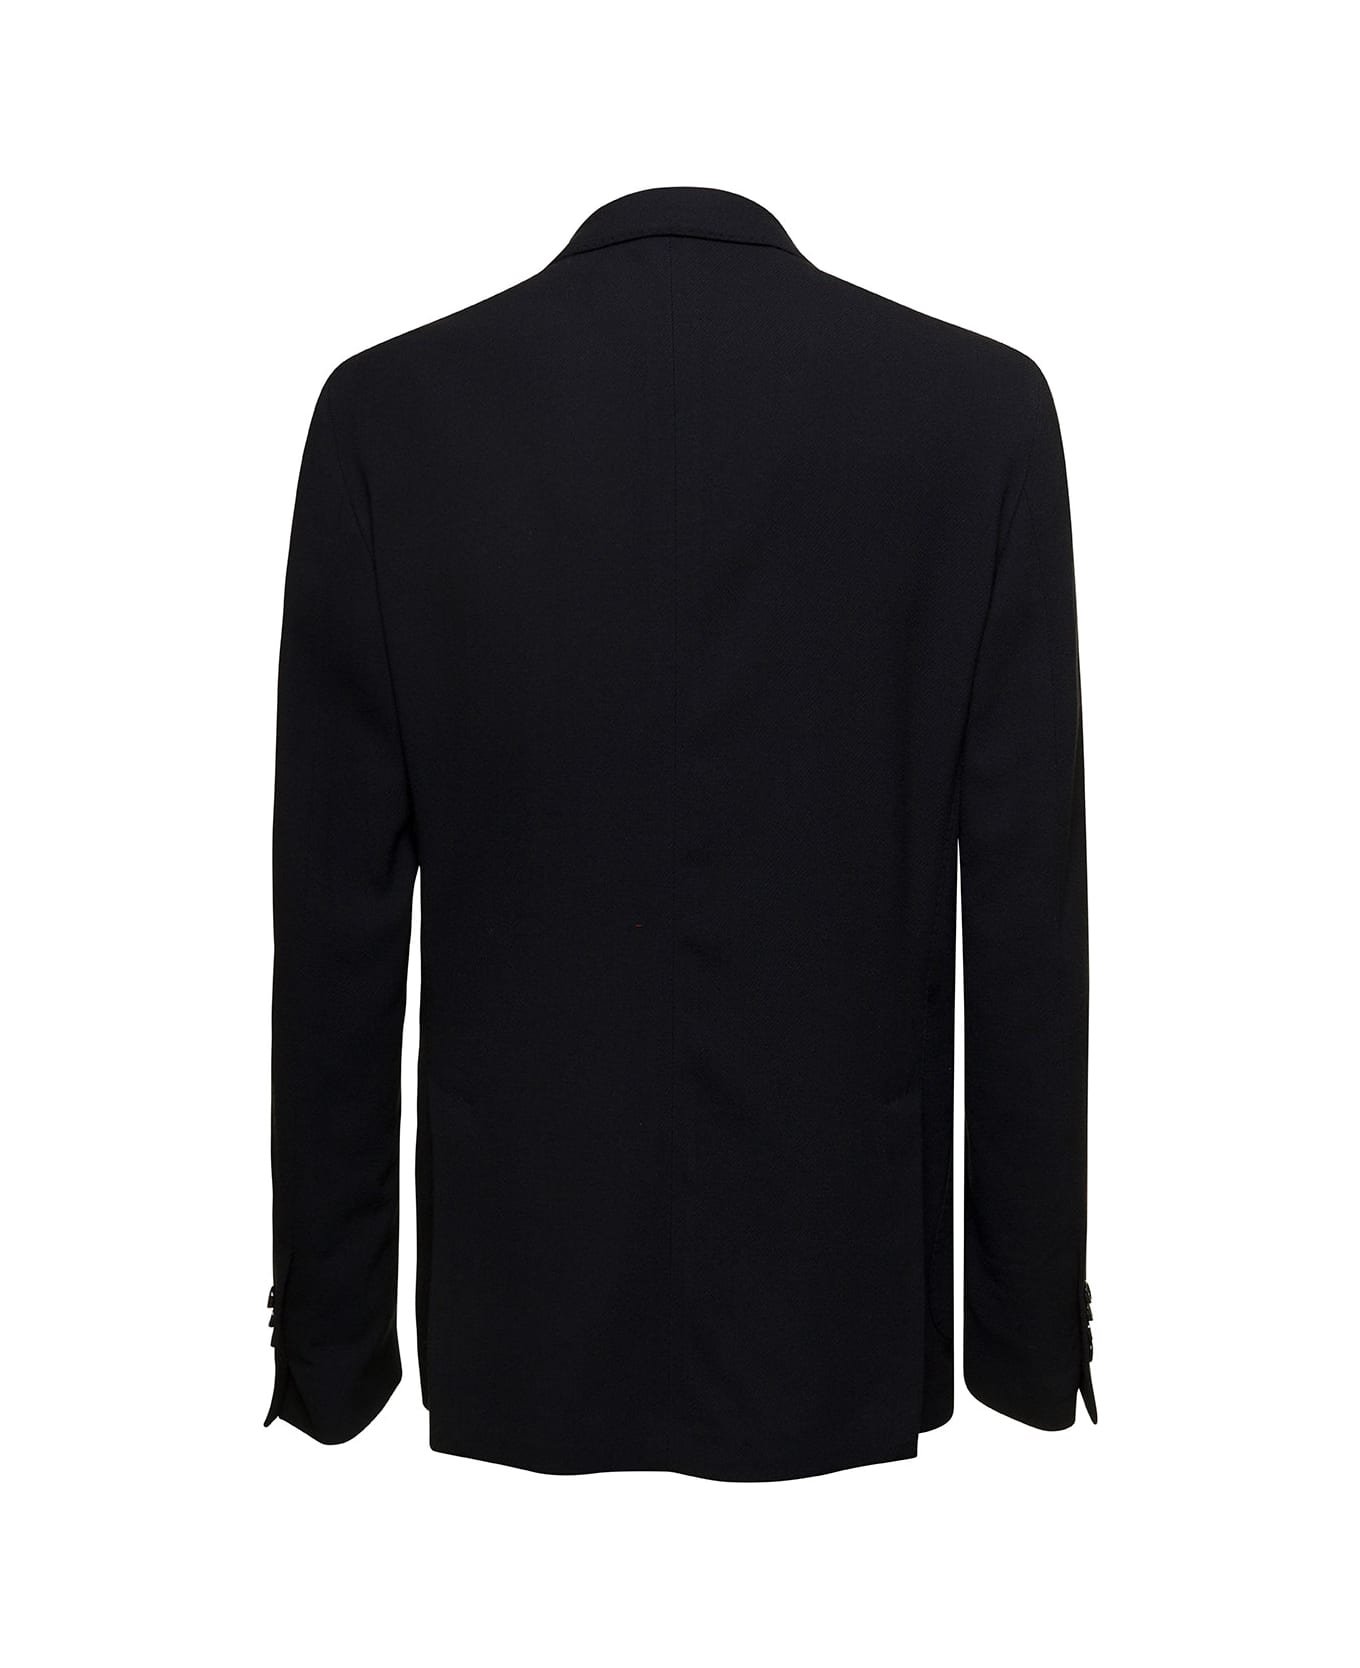 Lardini Black Double-breasted Jacket With Detachable Pin In Cotton And Wool Blend Man - Black